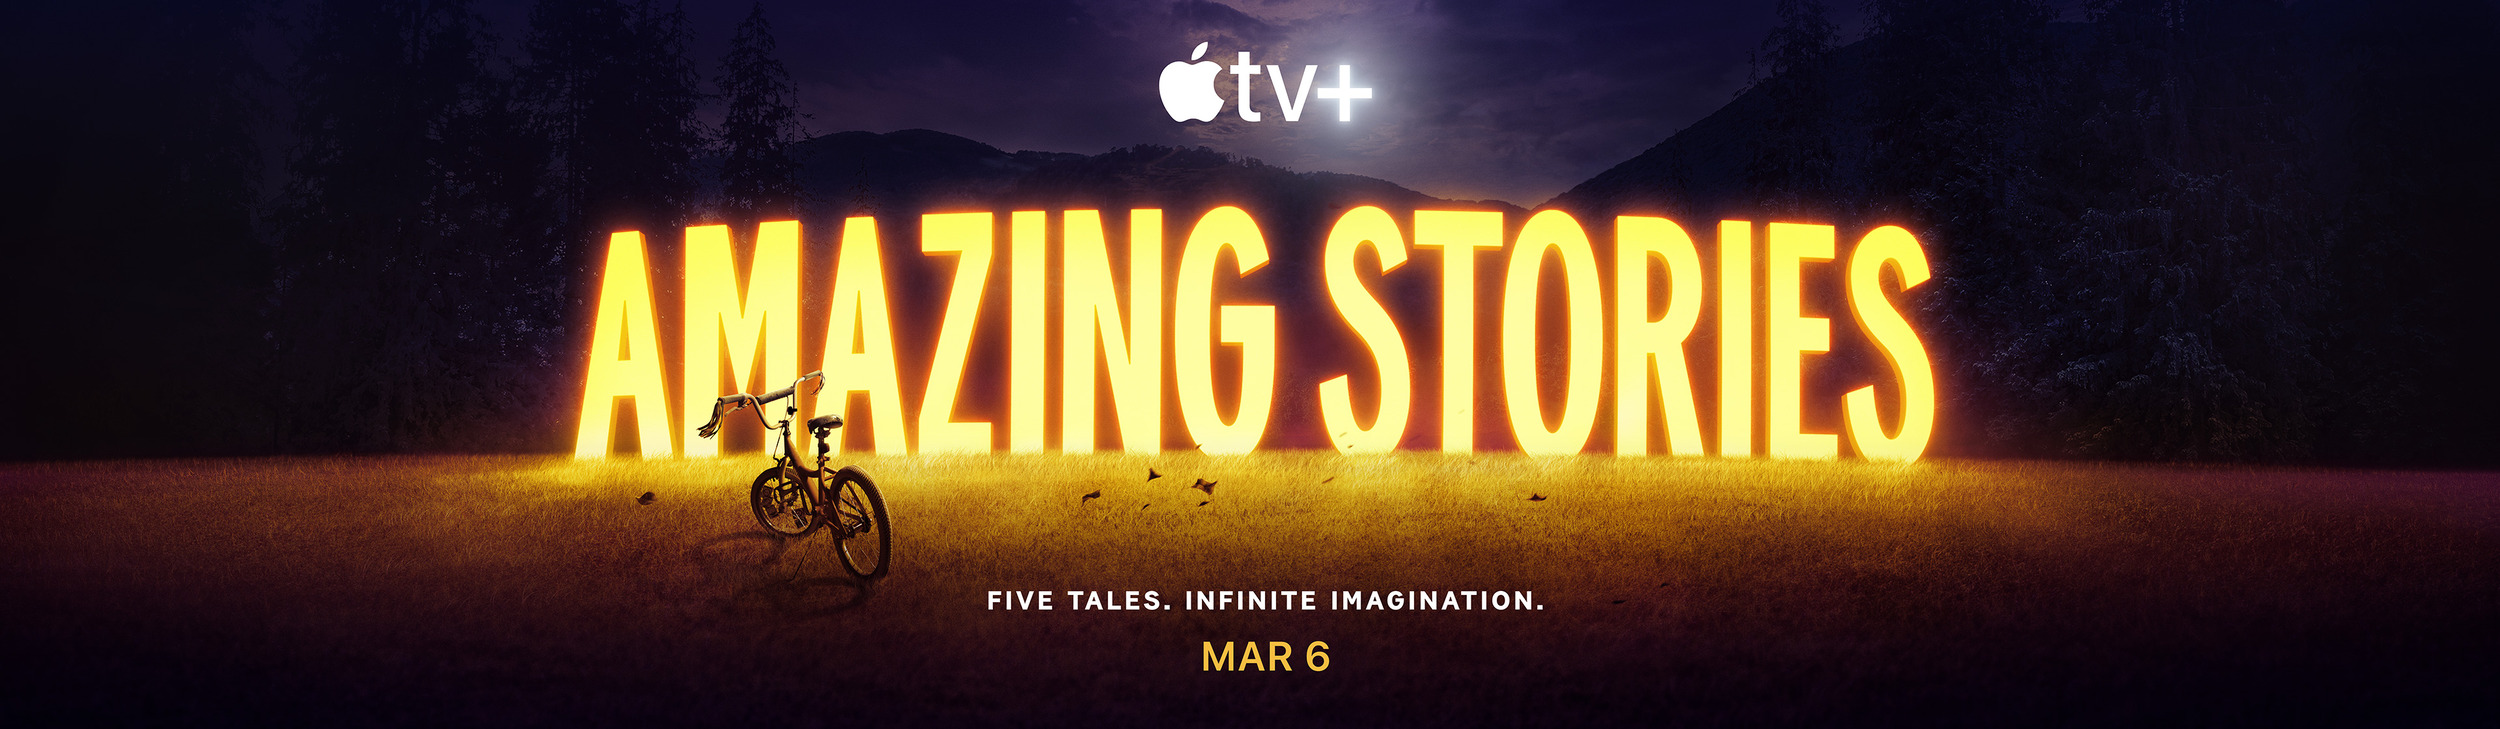 Mega Sized TV Poster Image for Amazing Stories (#13 of 19)